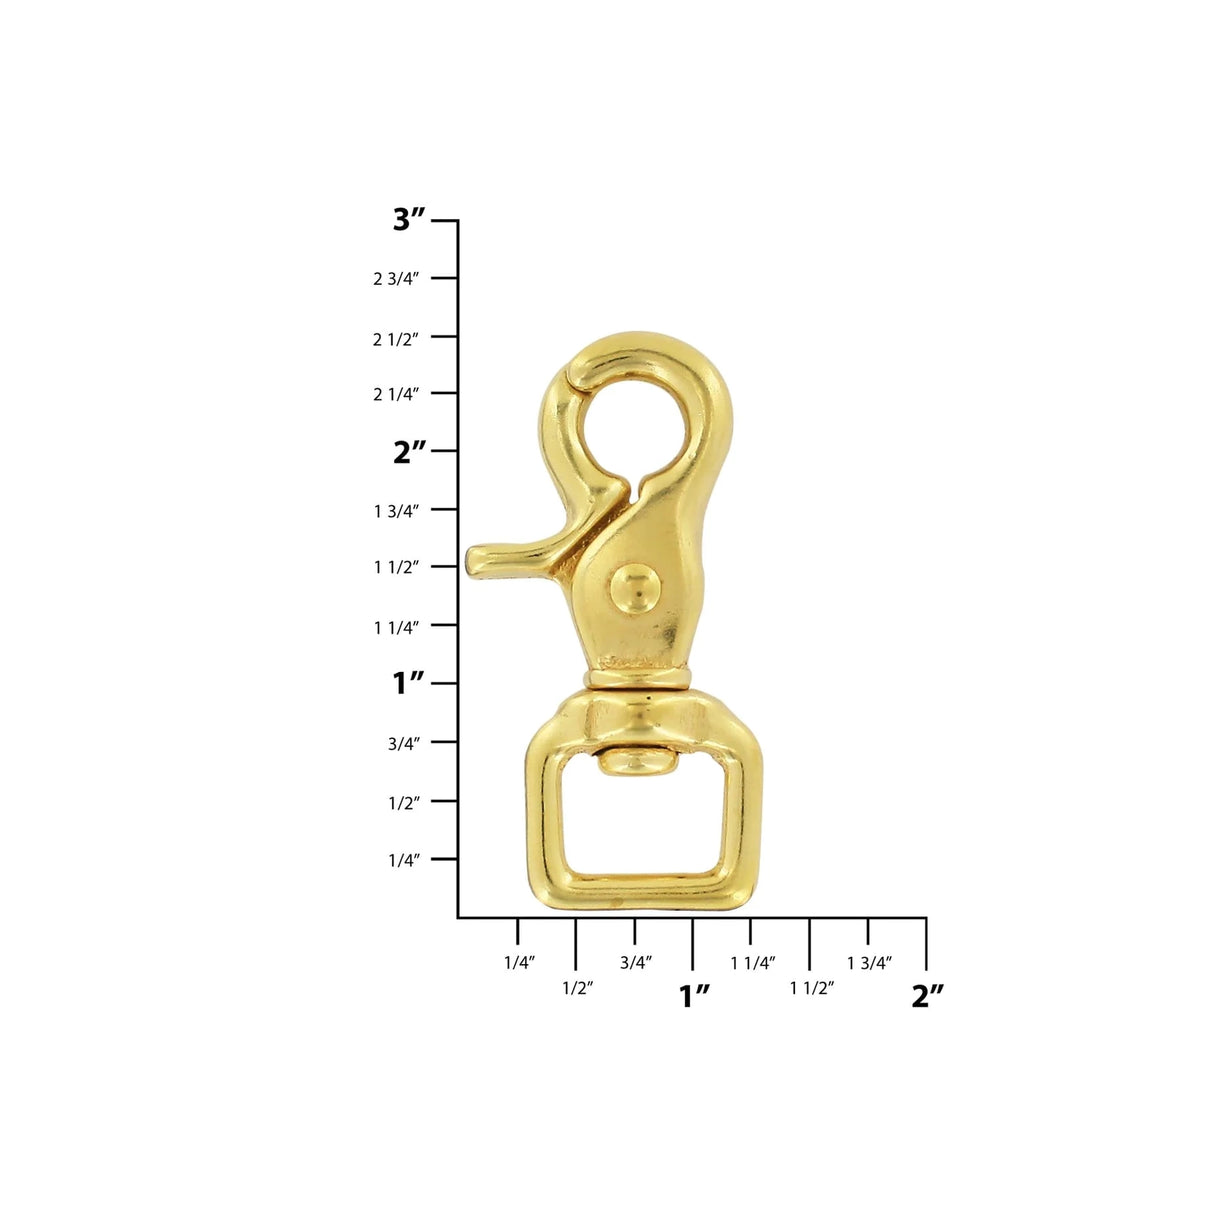 Solid Brass Trigger Snap Lobster Clip for Leather, Bags, Leashes & Accessories | | (3008A-0M-DOEB-LL)